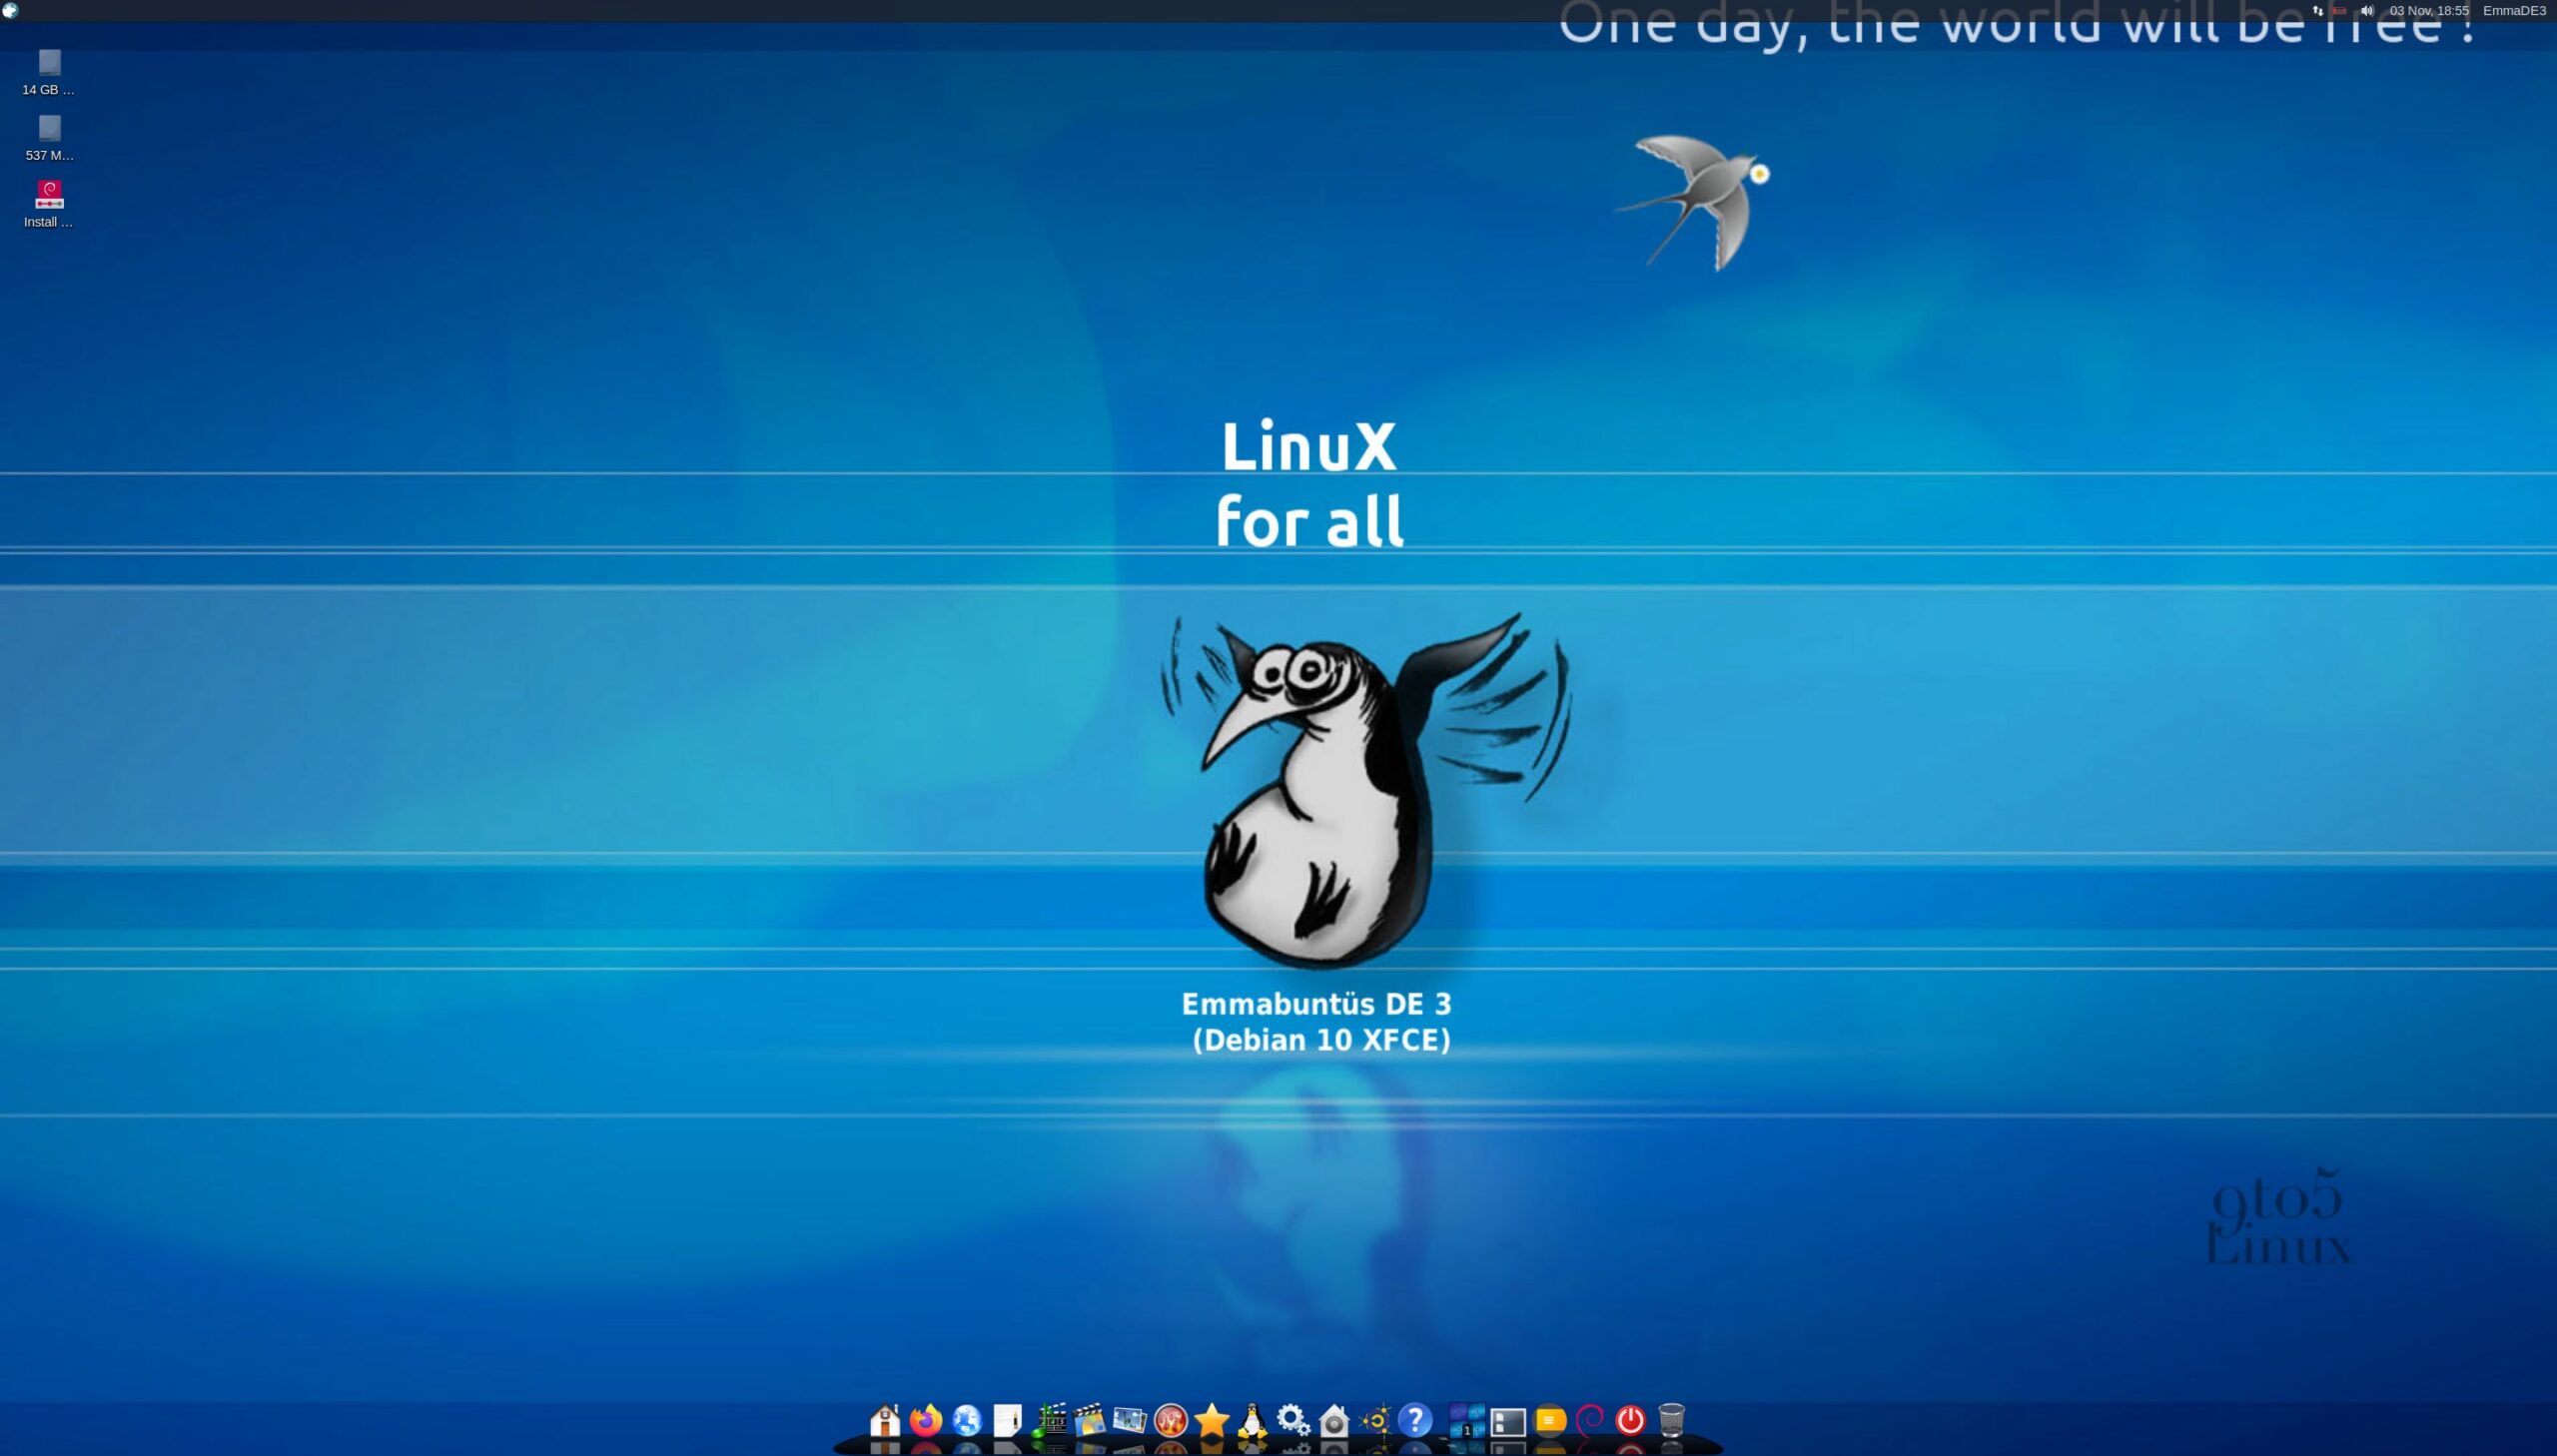 Emmabuntüs Linux Debian Edition Is Now Based on Debian Buster 10.6, Uses Xfce and LXQt